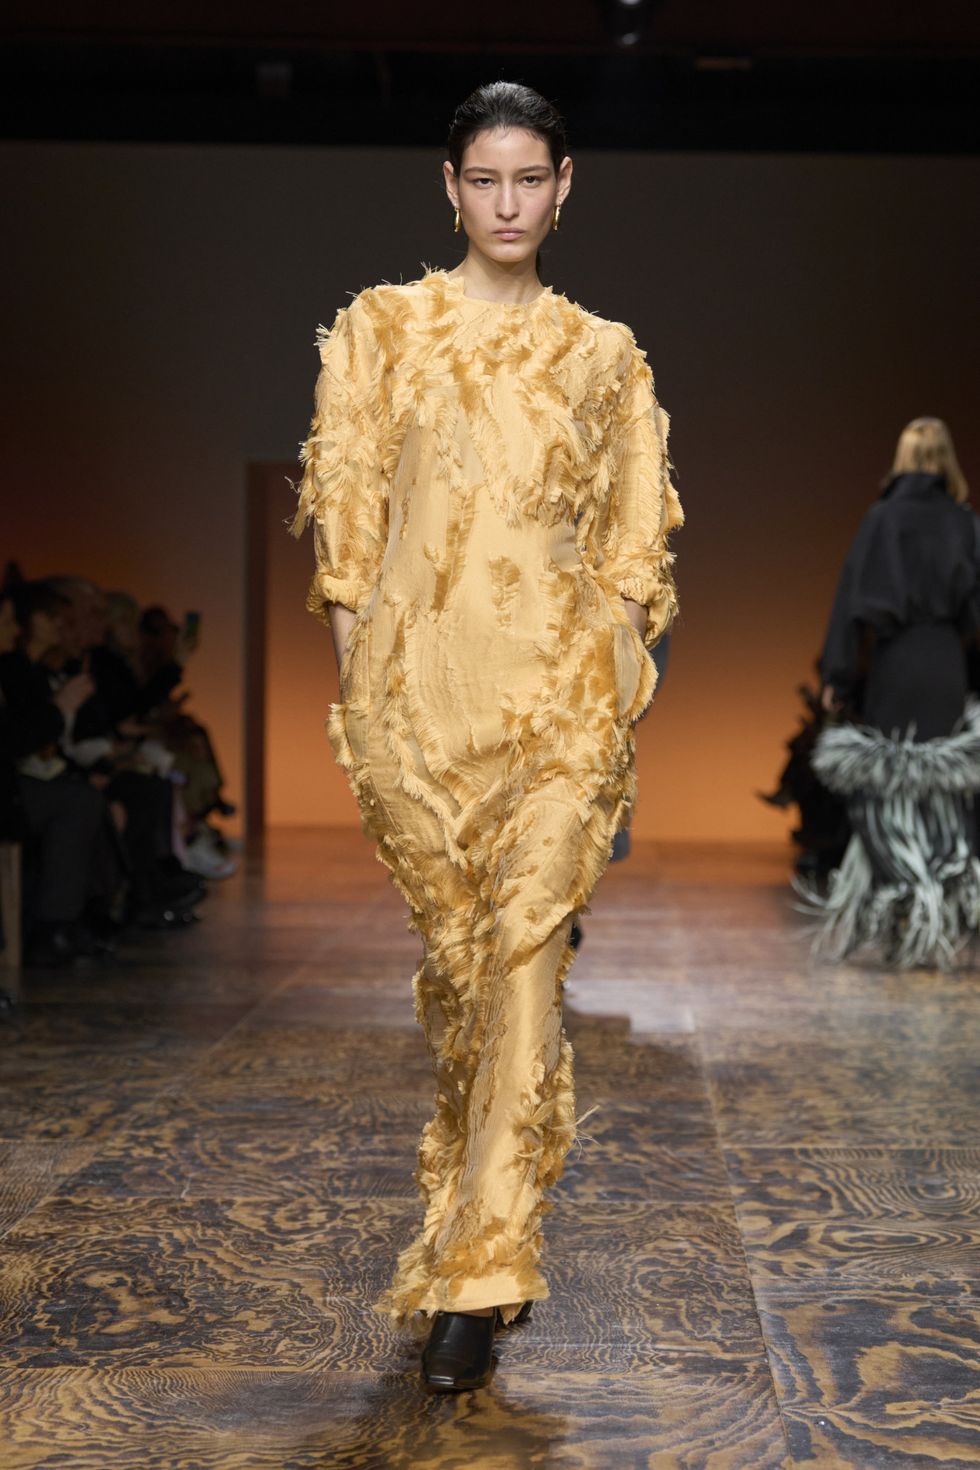 a person wearing a gold dress